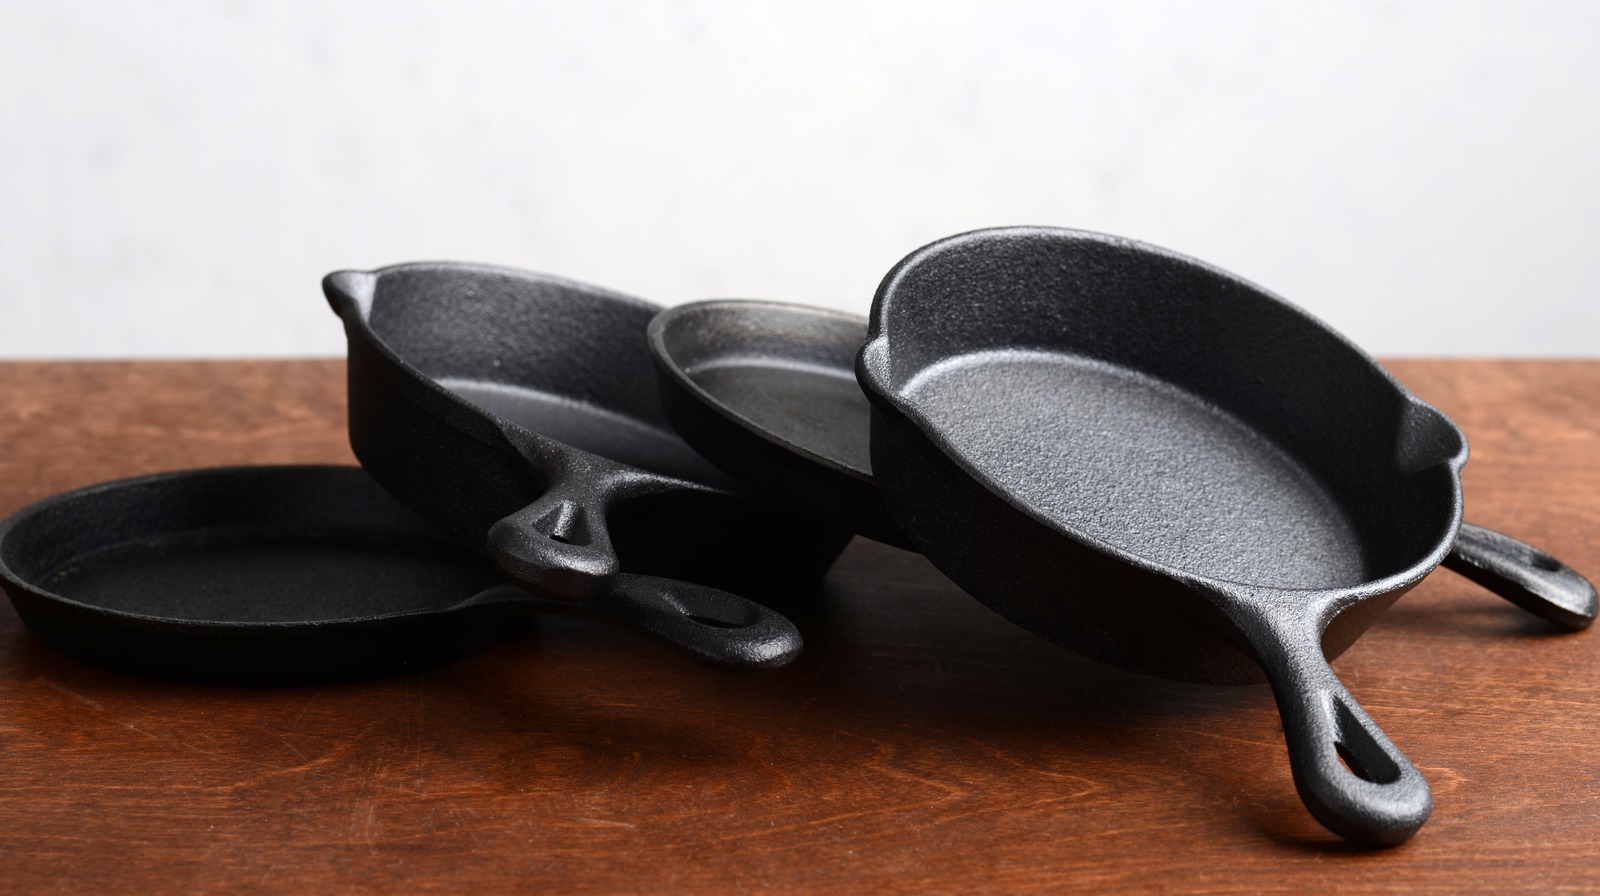 Lodge Cast Iron - How do you store your cast iron?